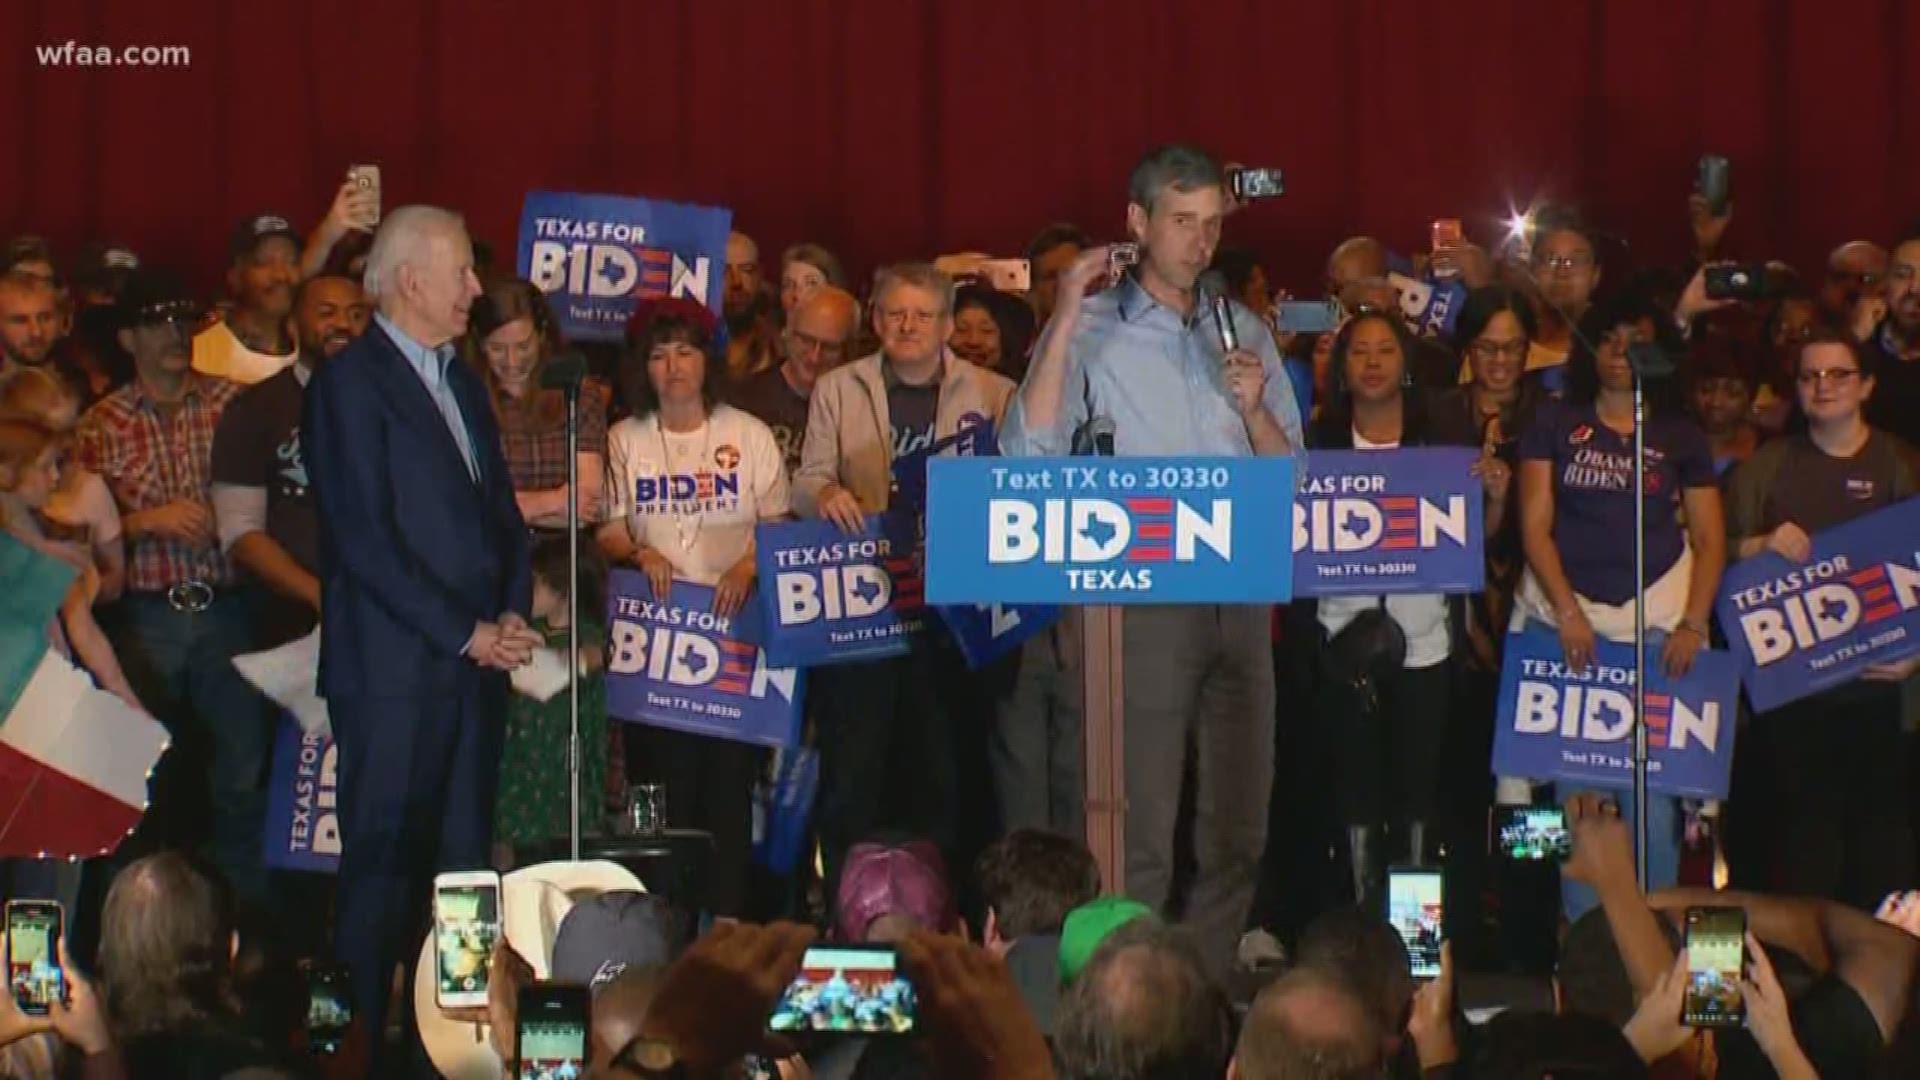 "I believe we can do this together. And that is why today I am ending my campaign and endorsing Joe Biden for president," Klobuchar said.